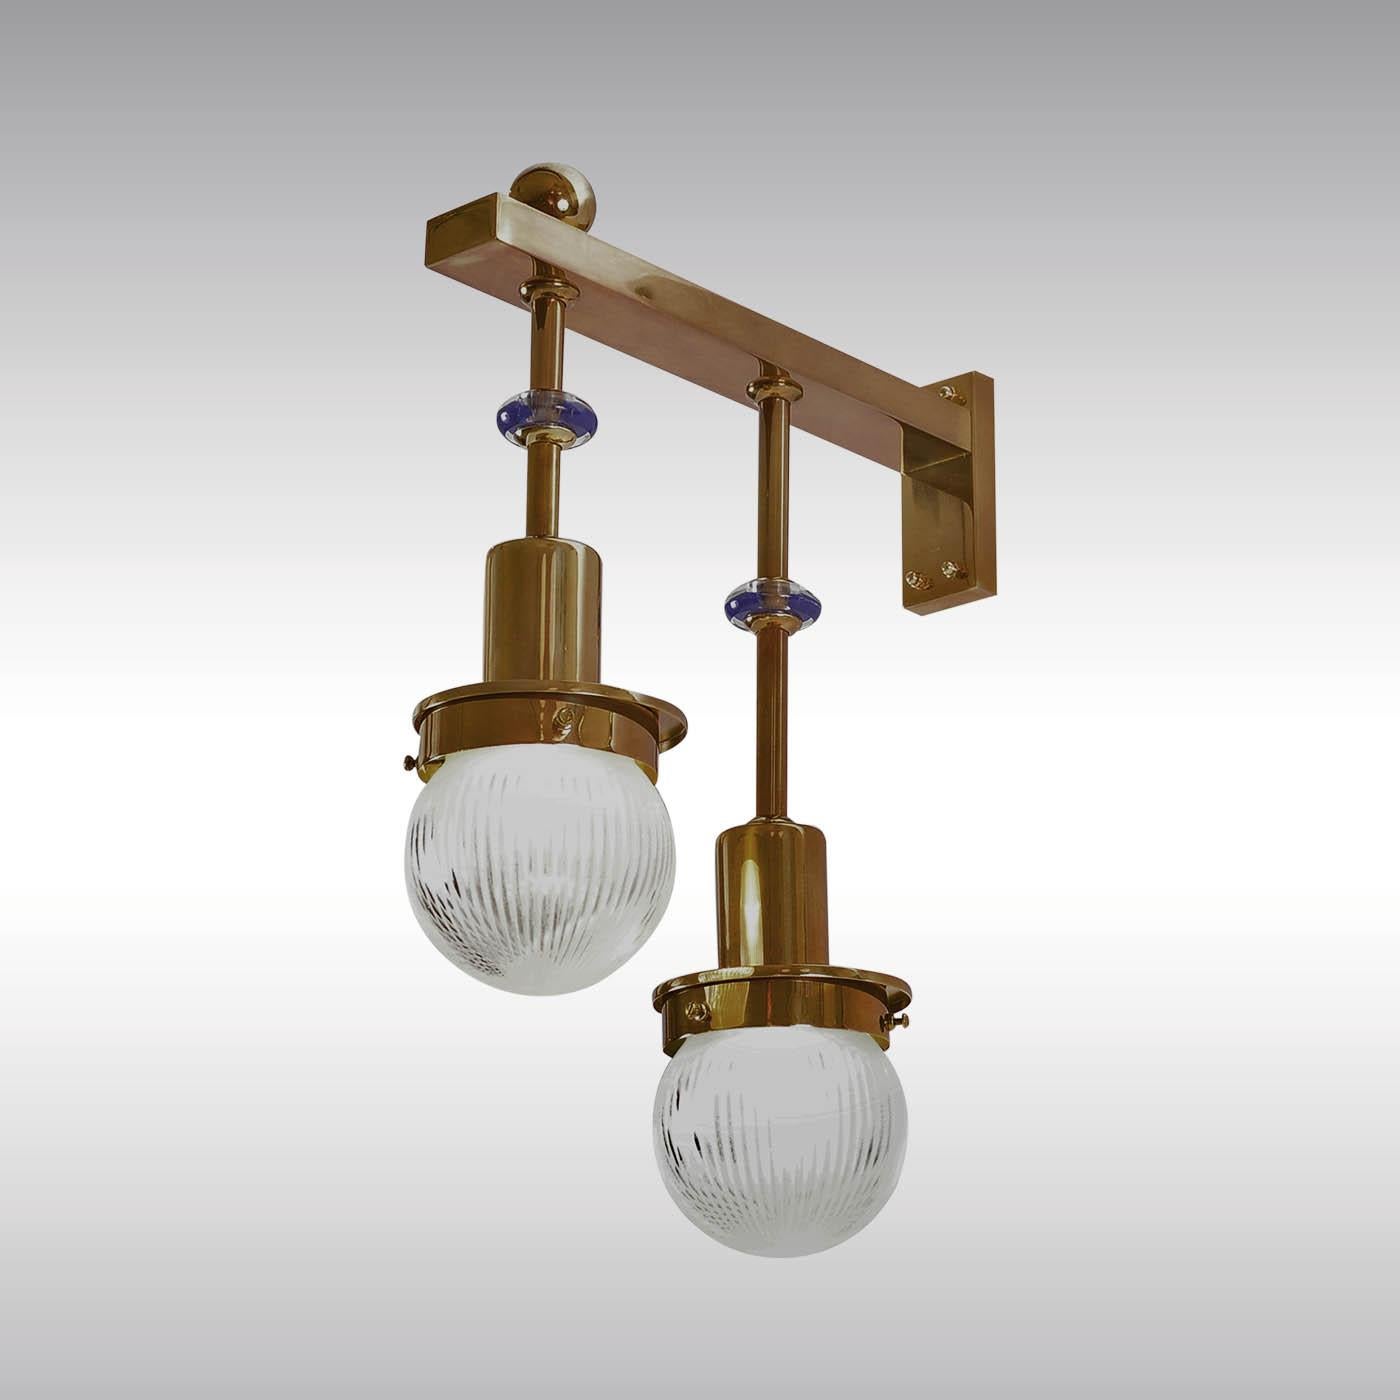 Wall-lamp for the famous Steinhof-Church in Vienna, built in 1904.
Available in different finishes. 
Originally manufactured at the Wiener Werkstaette Atelier, now custom-made production at the Woka Lamps Workshop in Vienna.

Most components